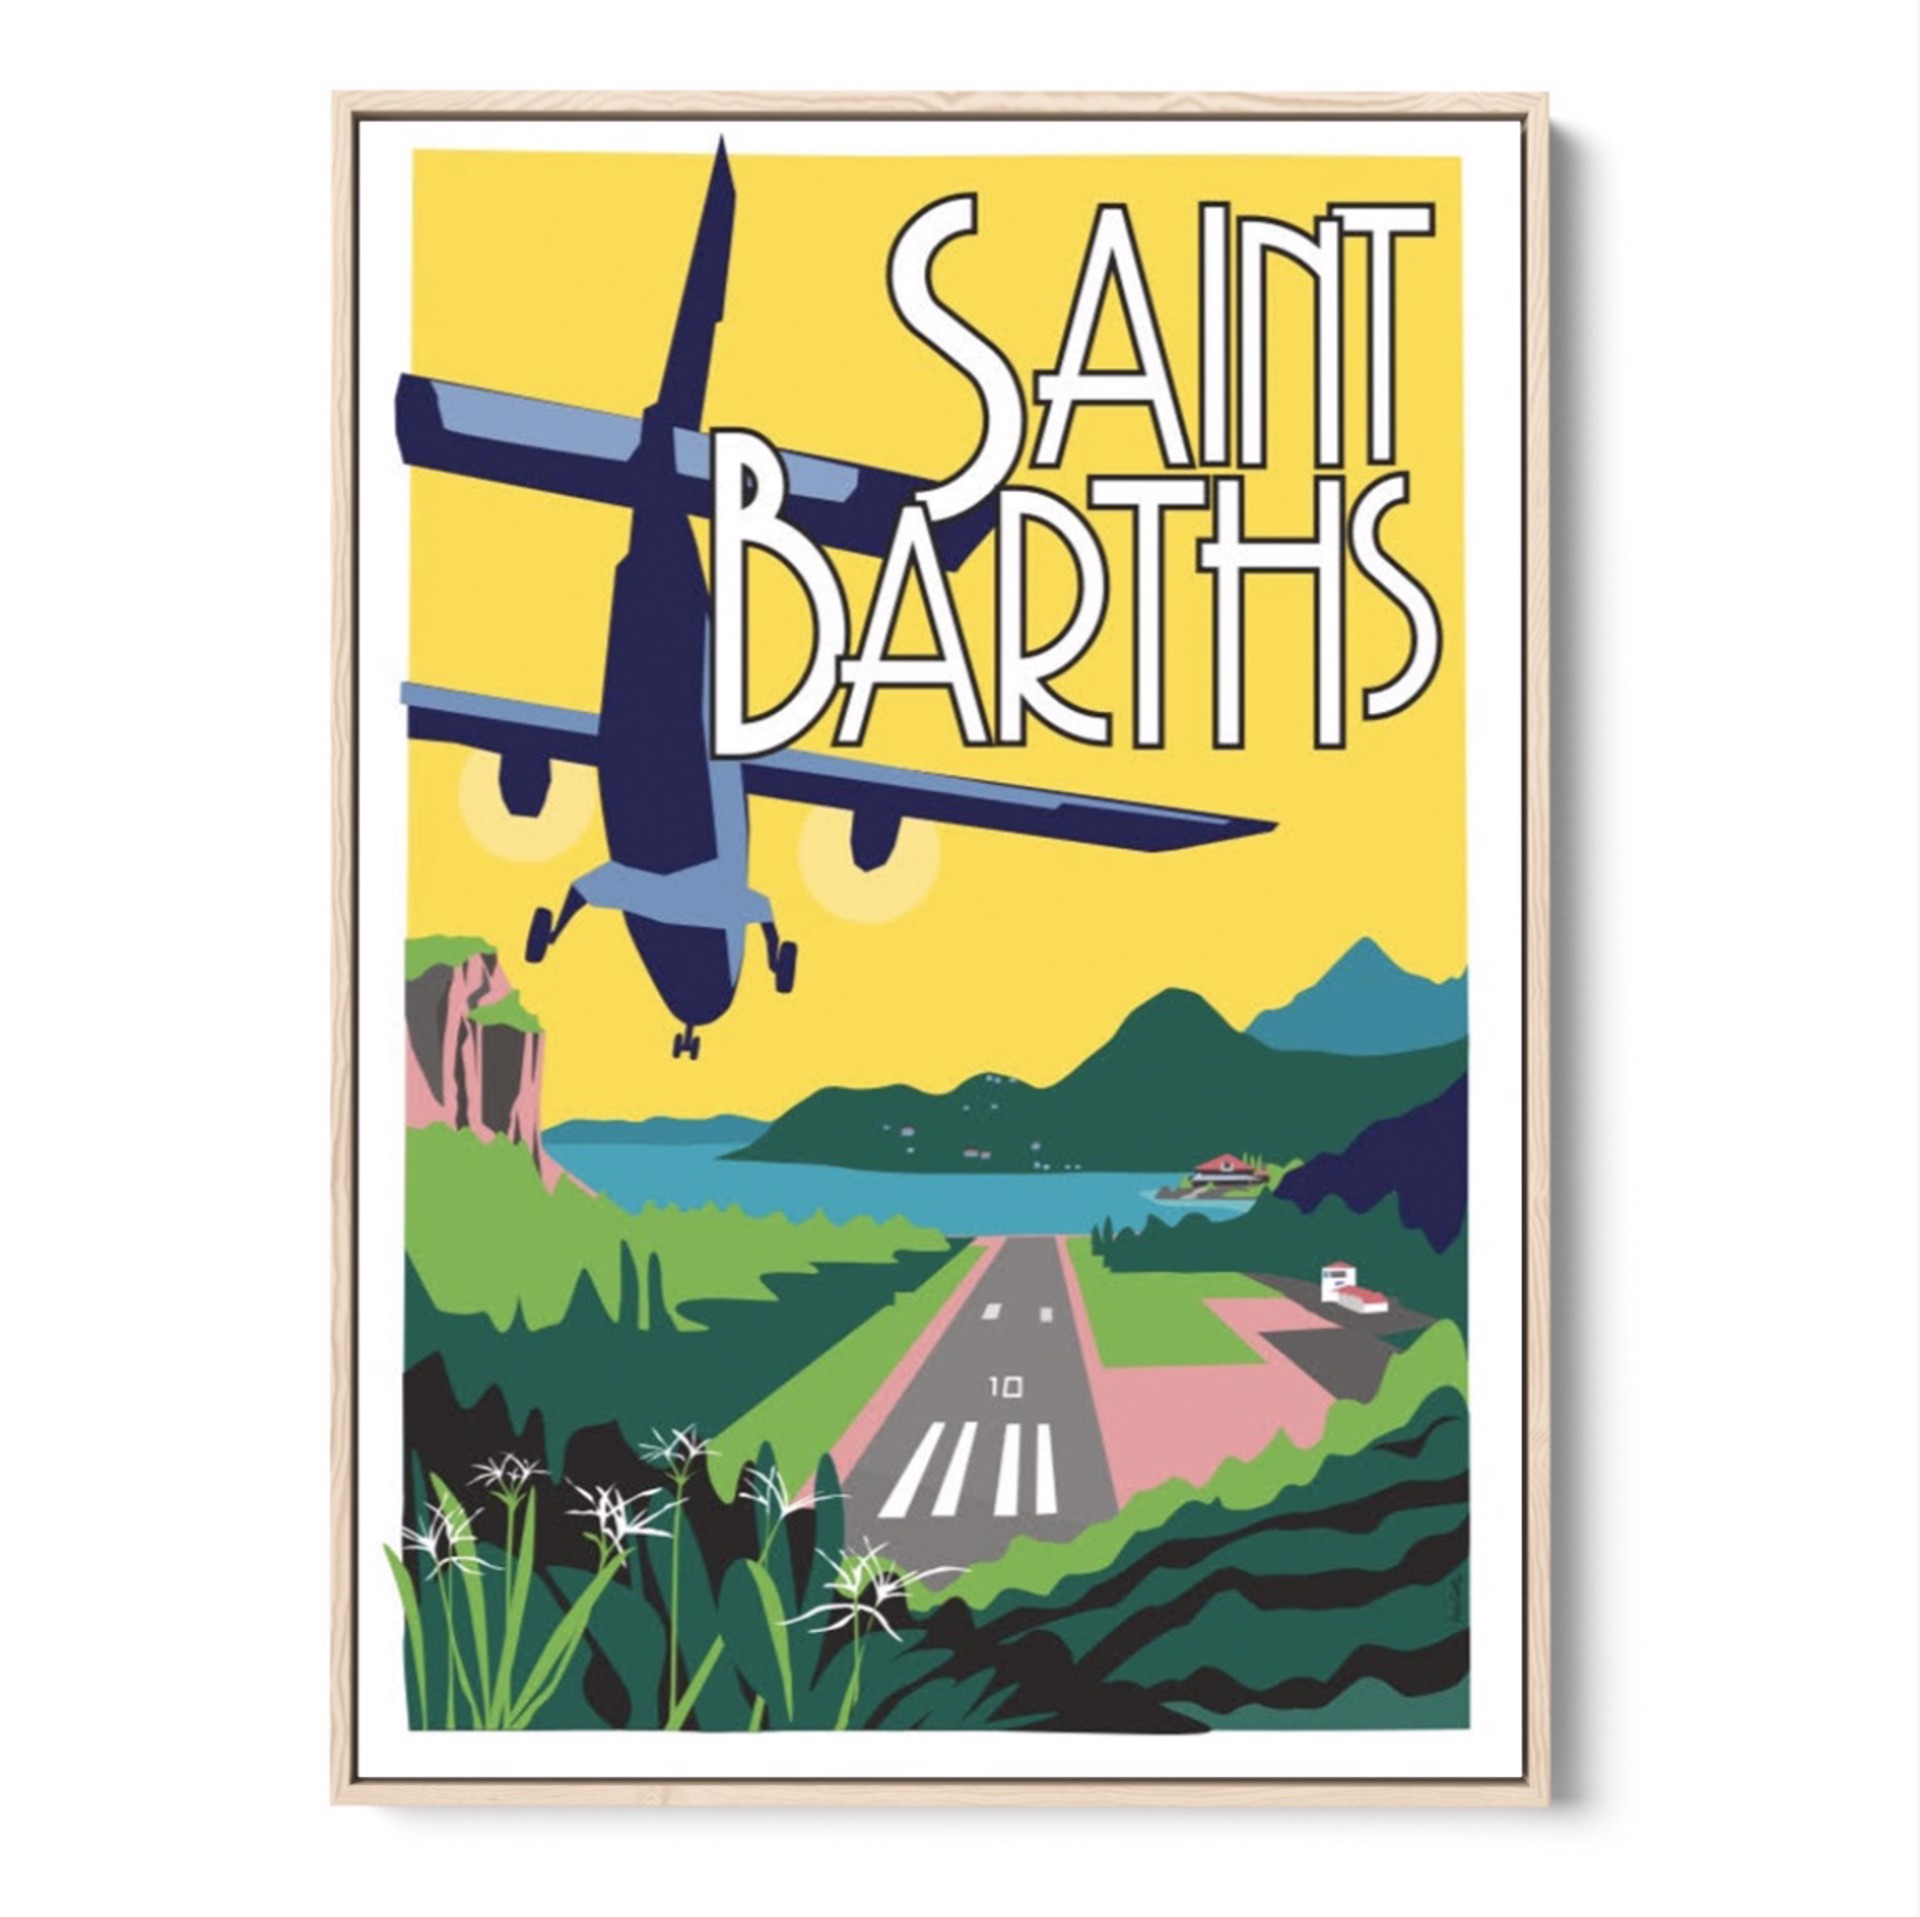 Welcome to St Barth!